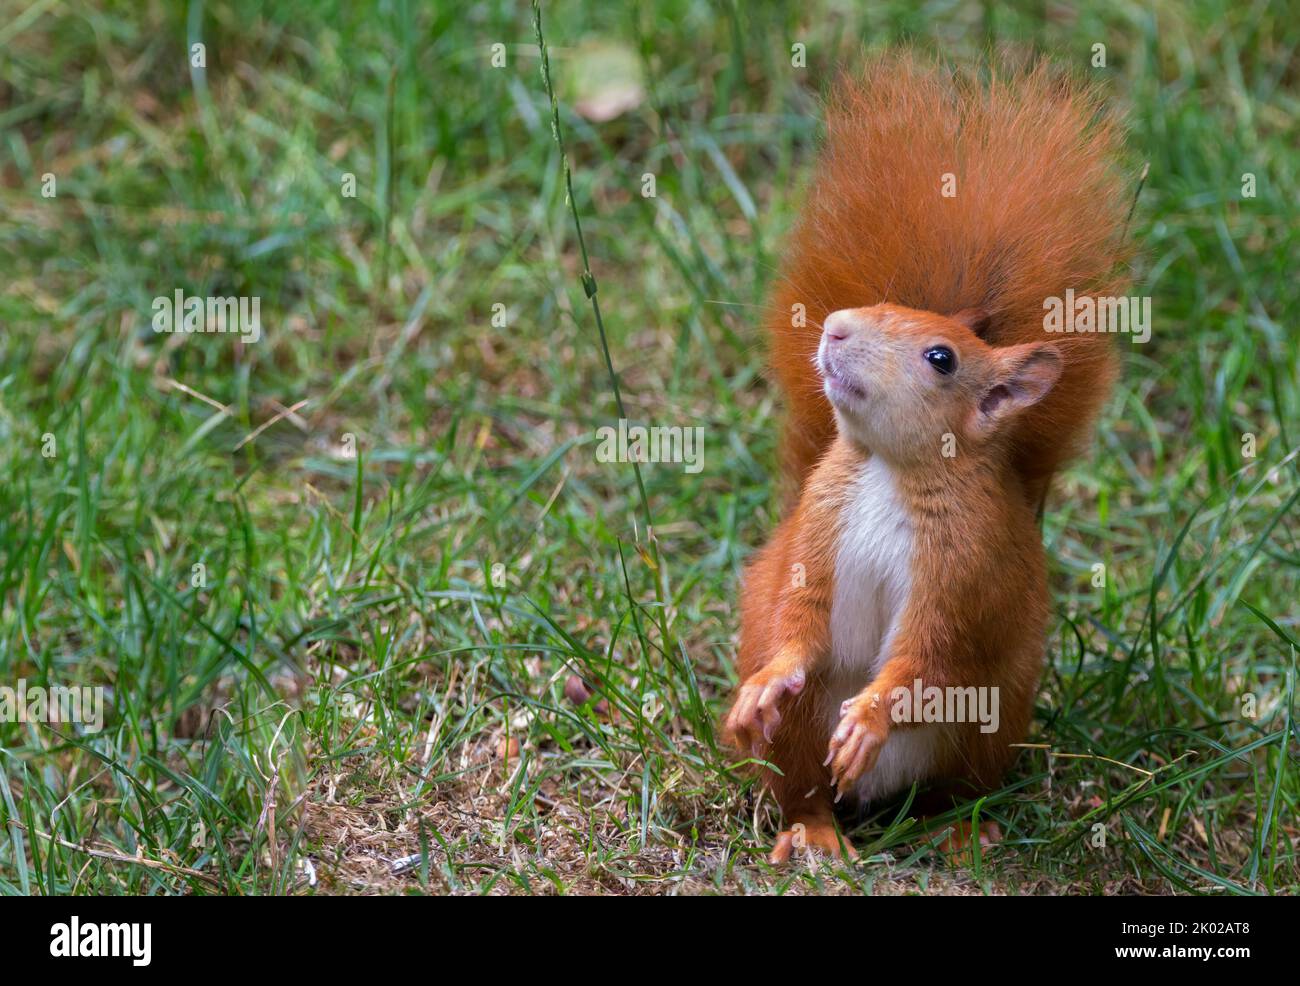 Red squirrel (sciurus vulgaris) bright chestnut fur with orange brown feet and lower leg a large bushy tail and ear tufts that are longer in winter Stock Photo